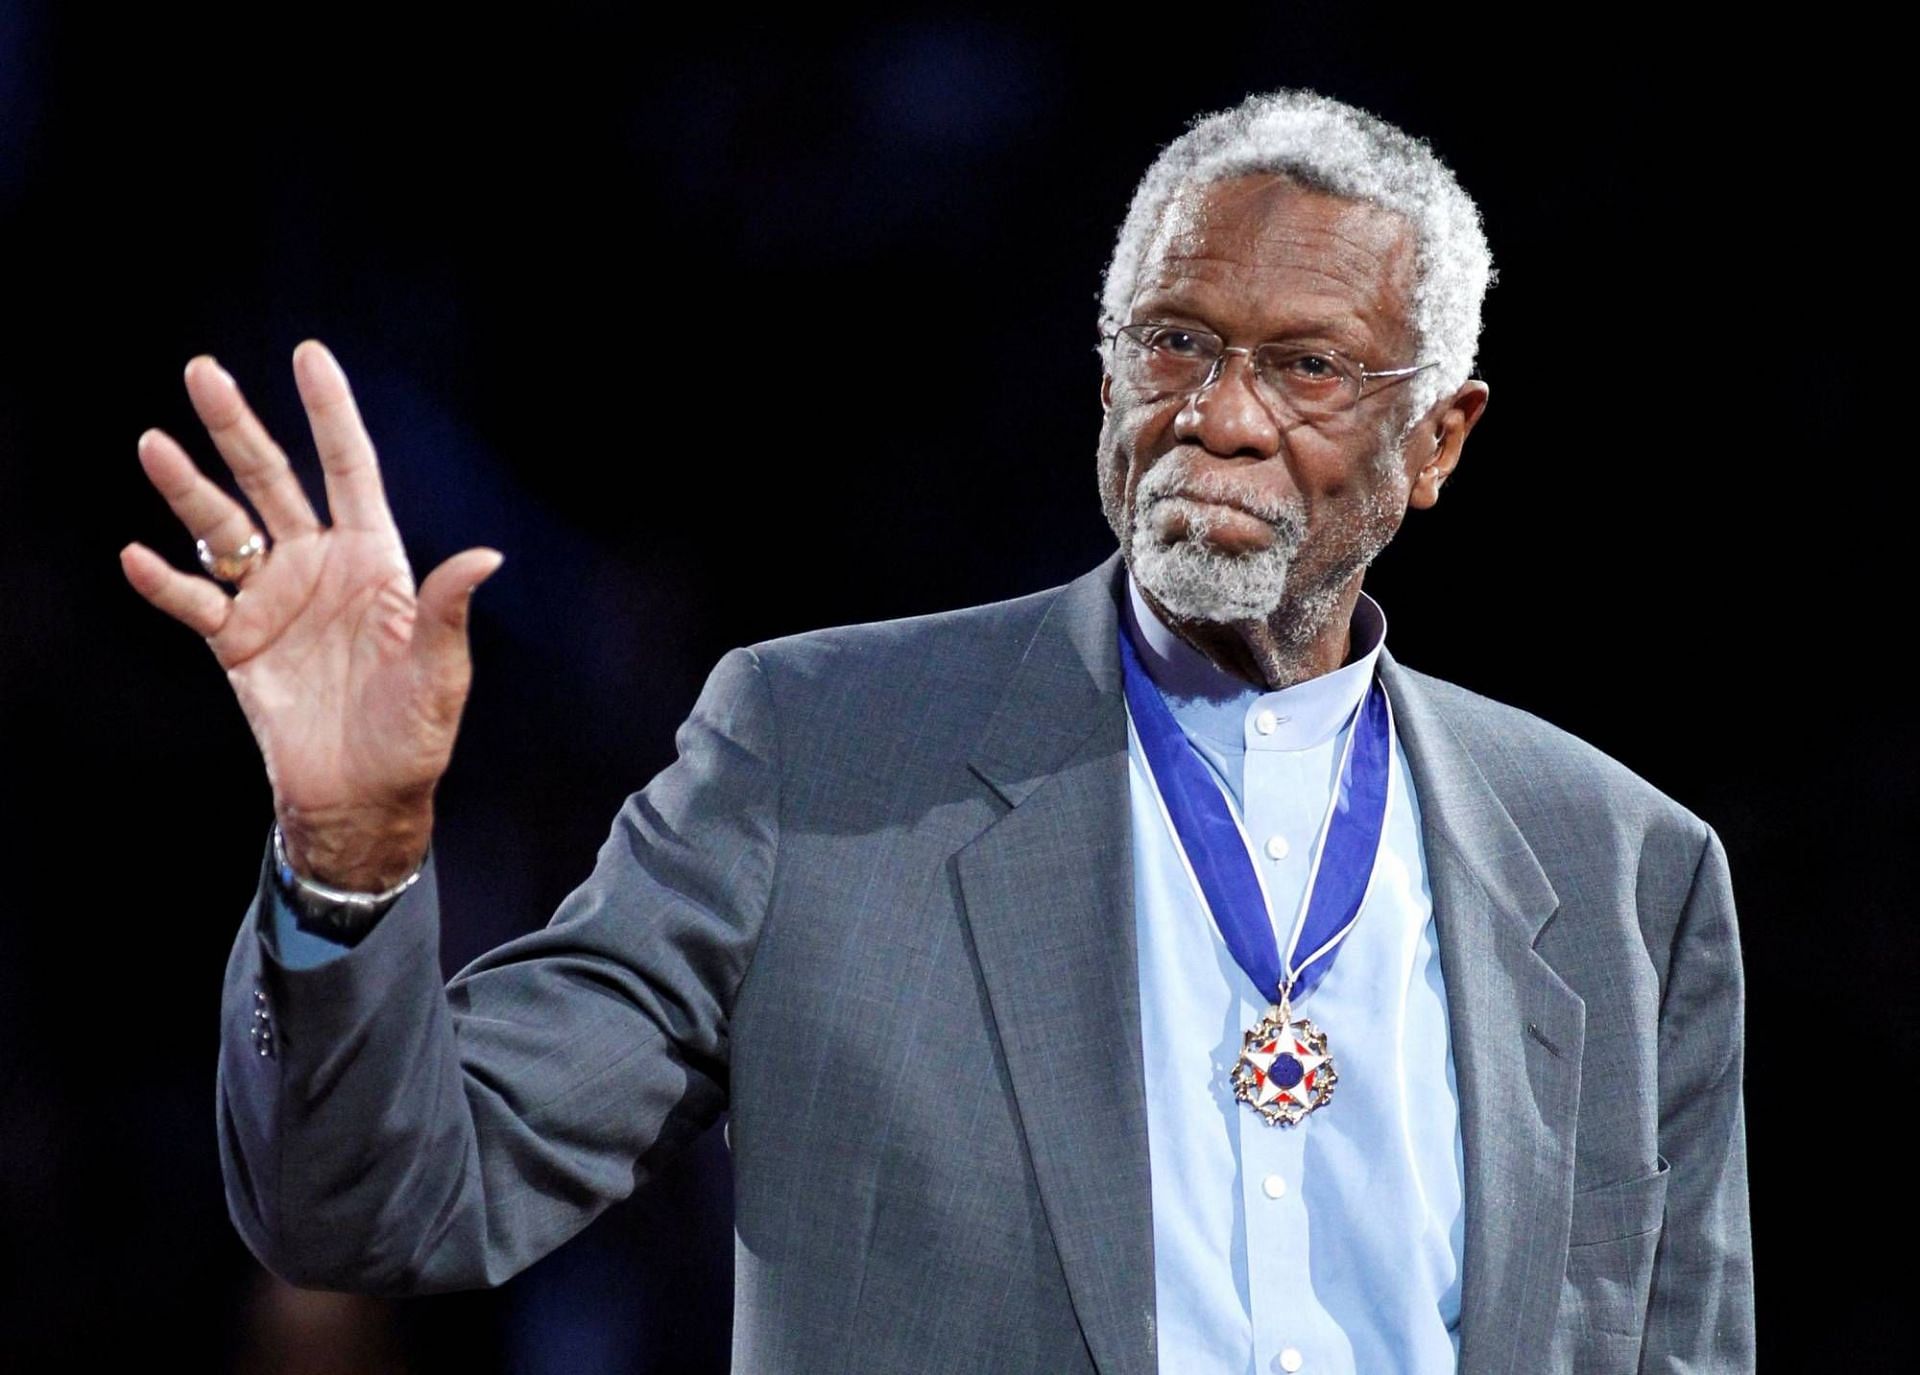 NBA and Celtics legend Bill Russell passes away at 88